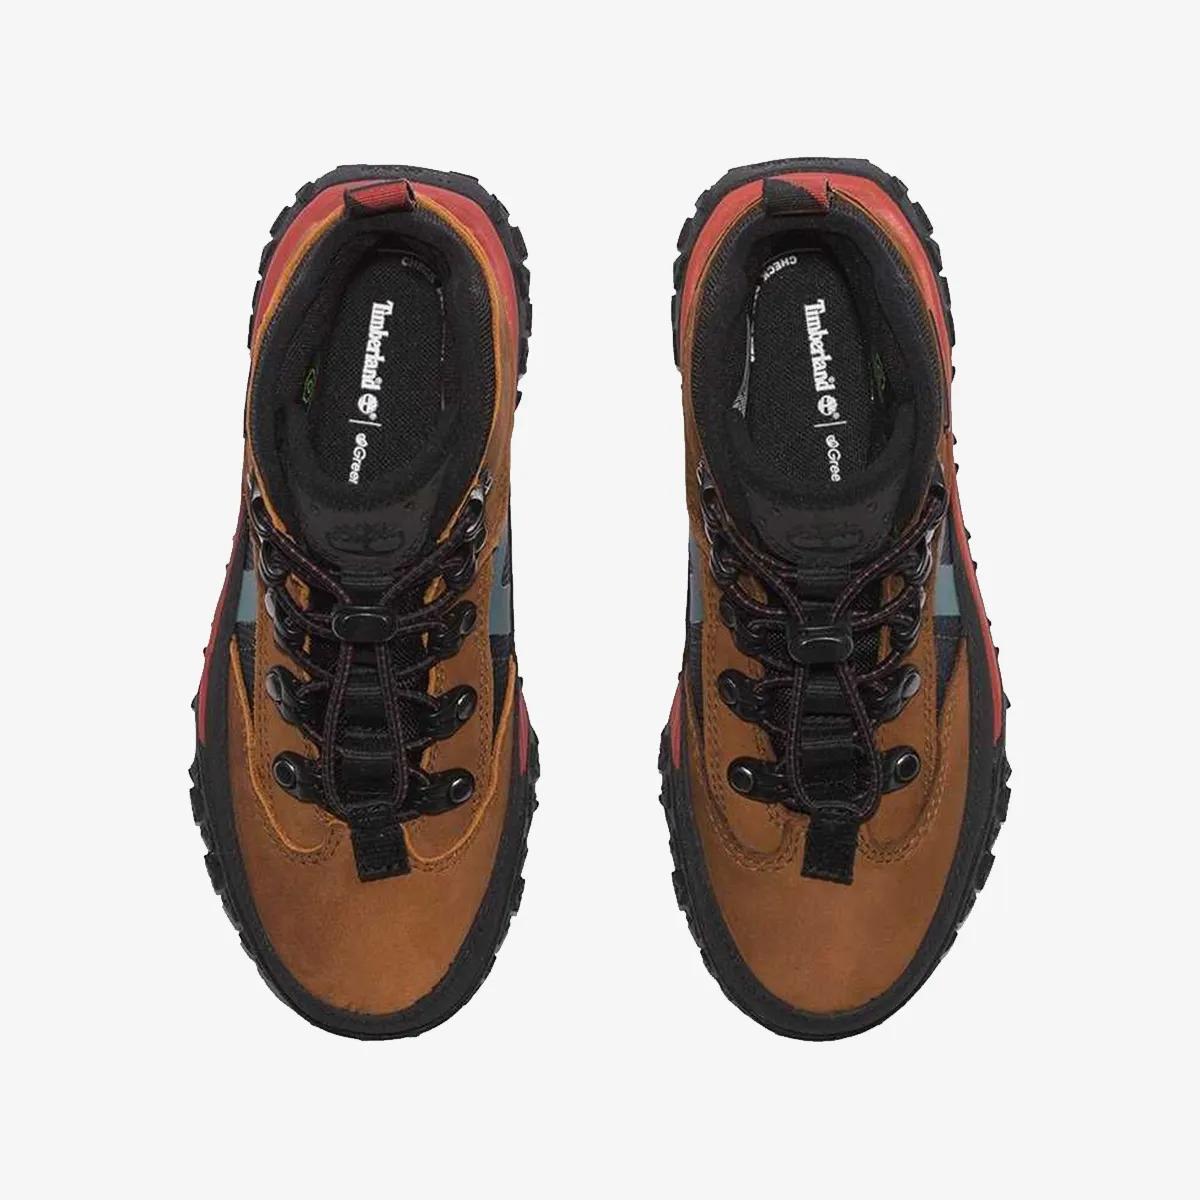 MID LACE UP WATERPROOF HIKING BOOT 